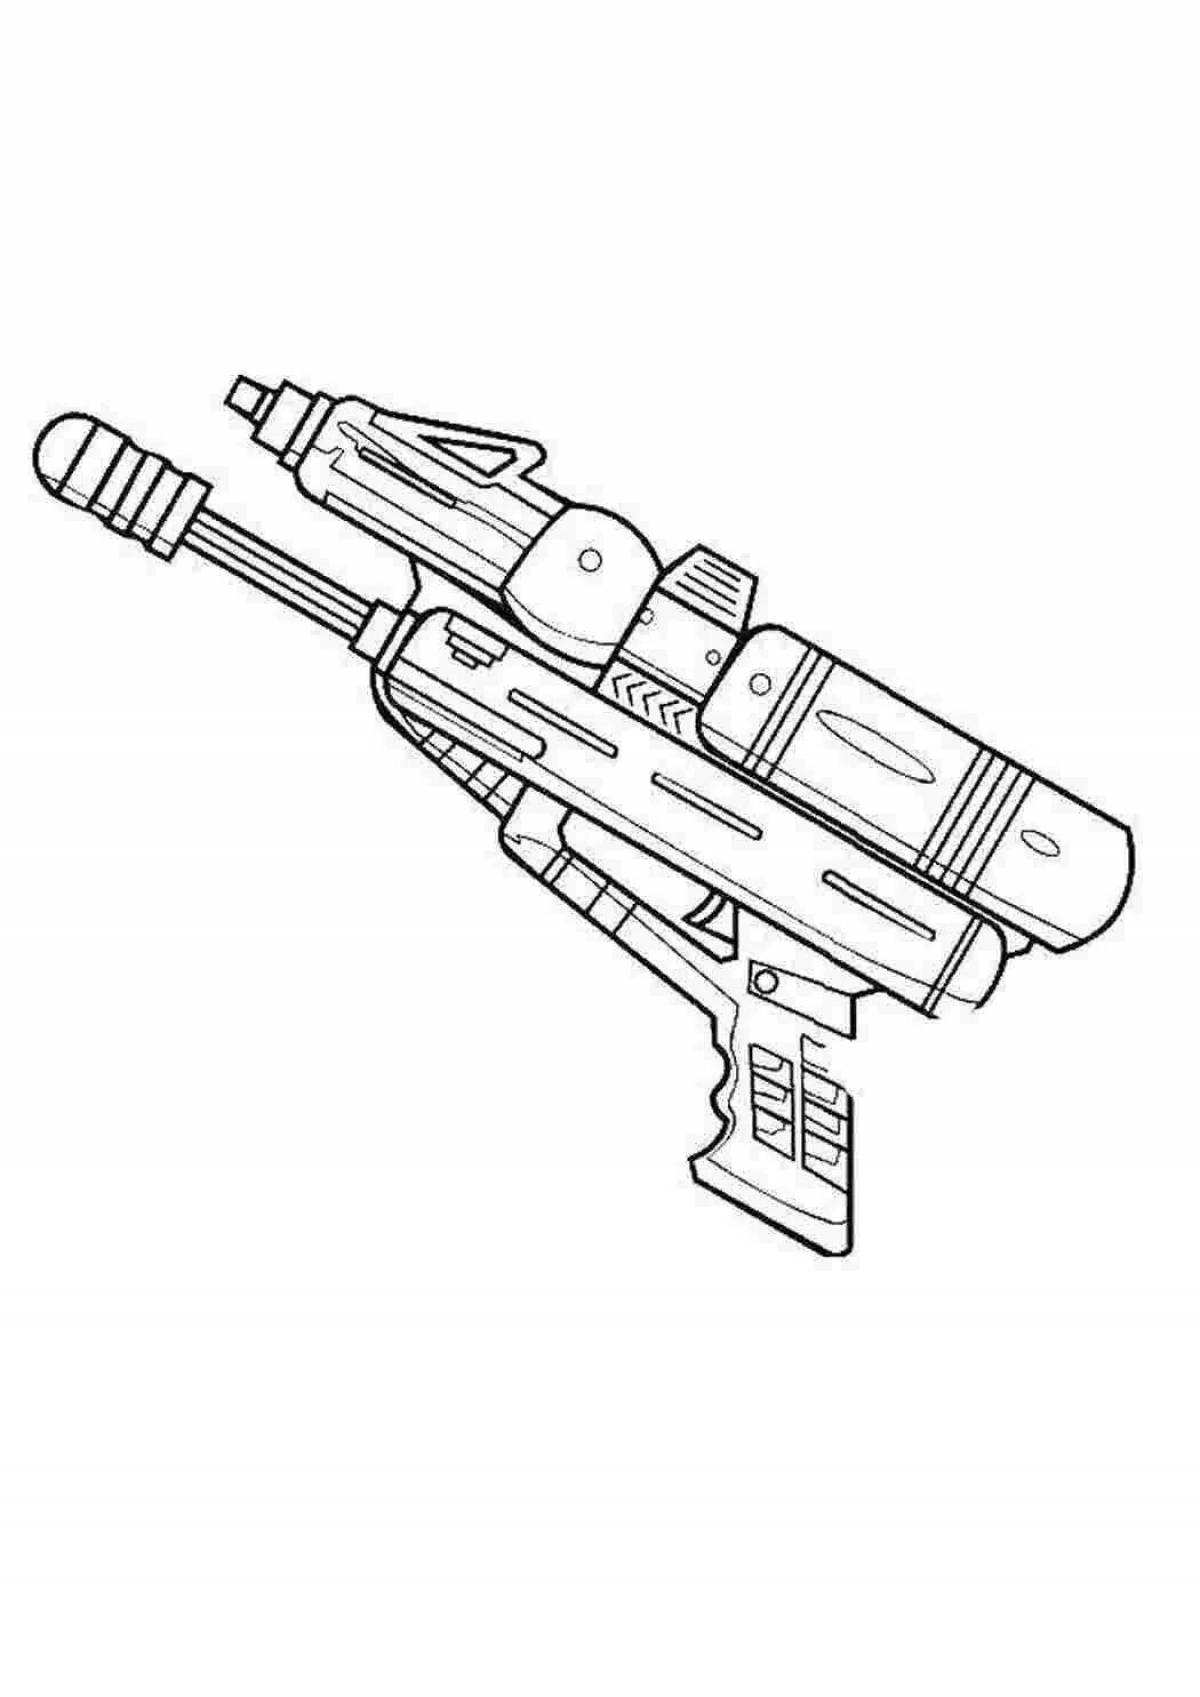 Fascinating coloring pages with guns for boys